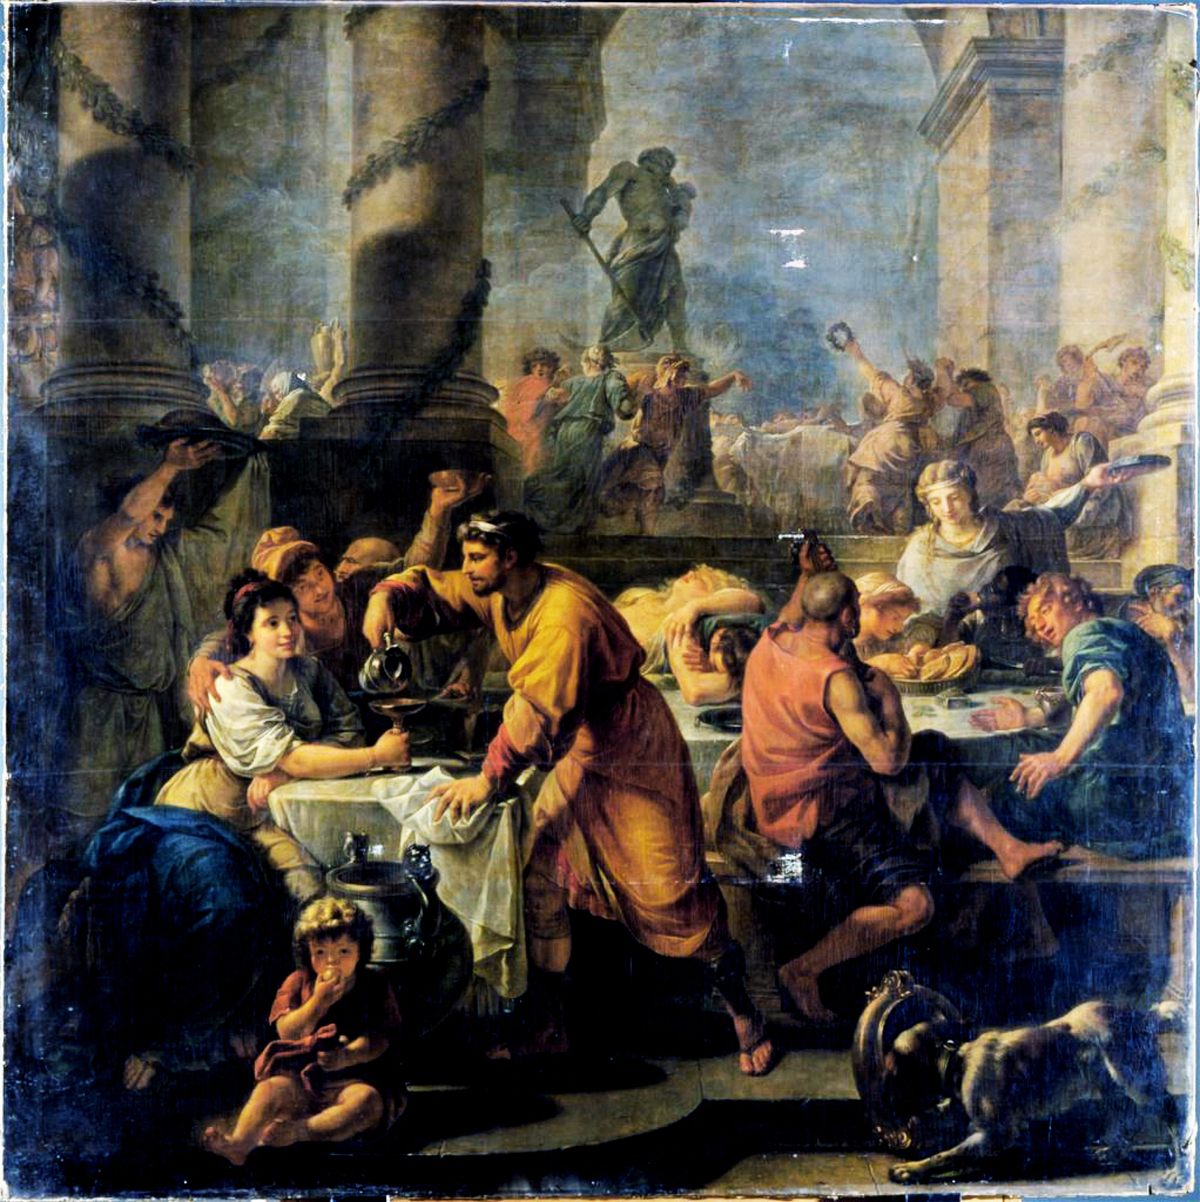 "Saturnalia," painted by Antoine Callet in 1782-3, depicts the ancient Roman feast with evergreen decor.